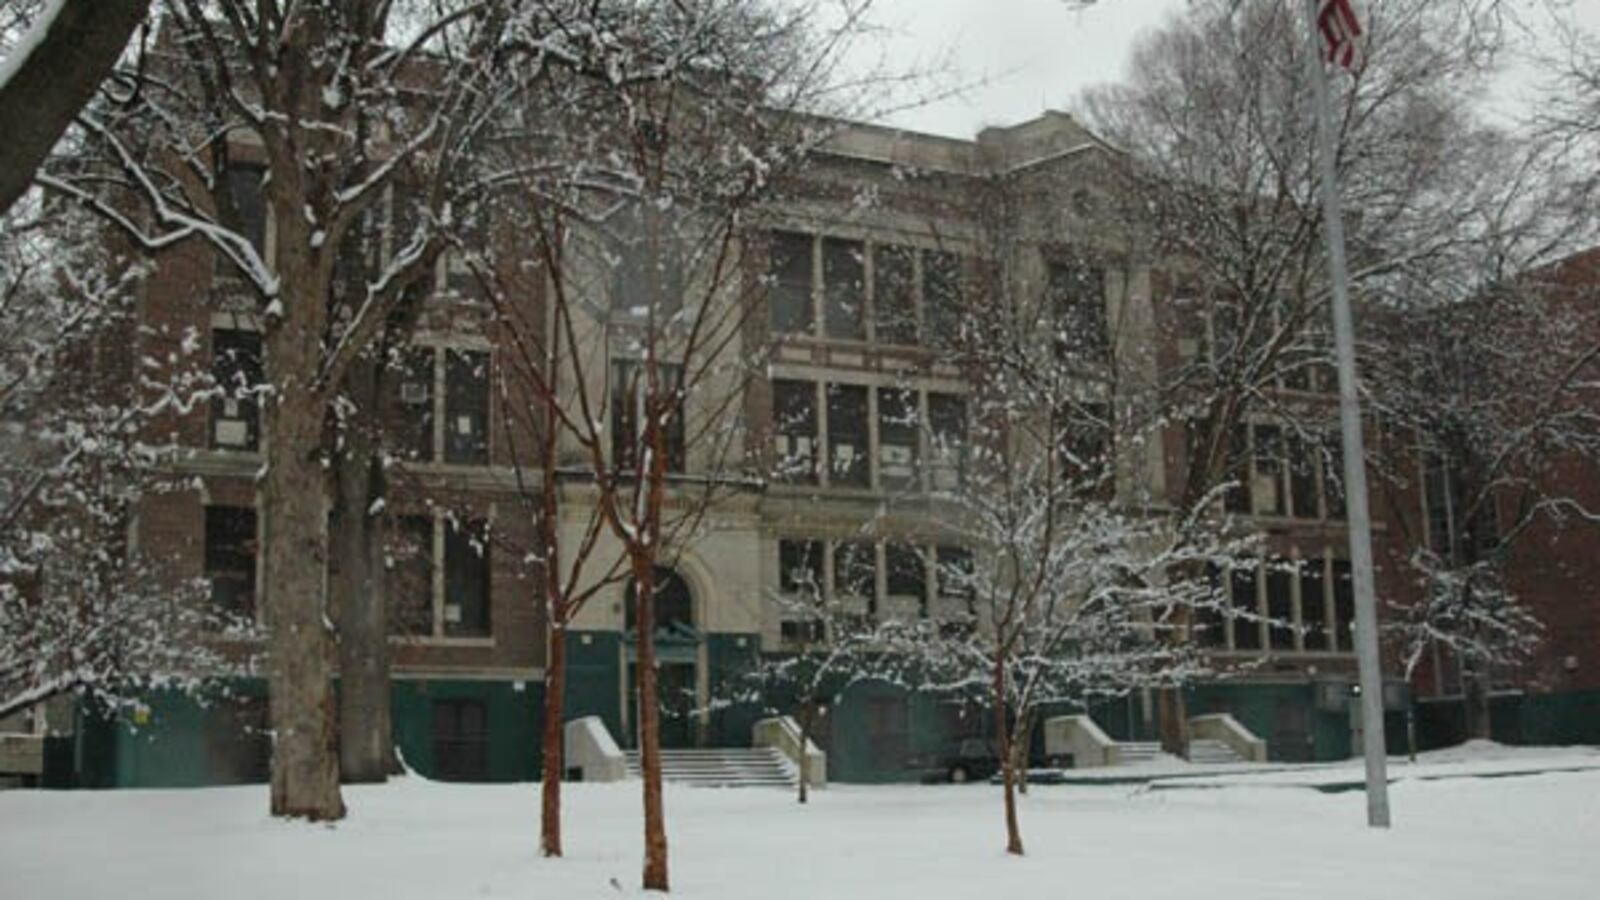 Exterior of Germantown High in the winter snow.